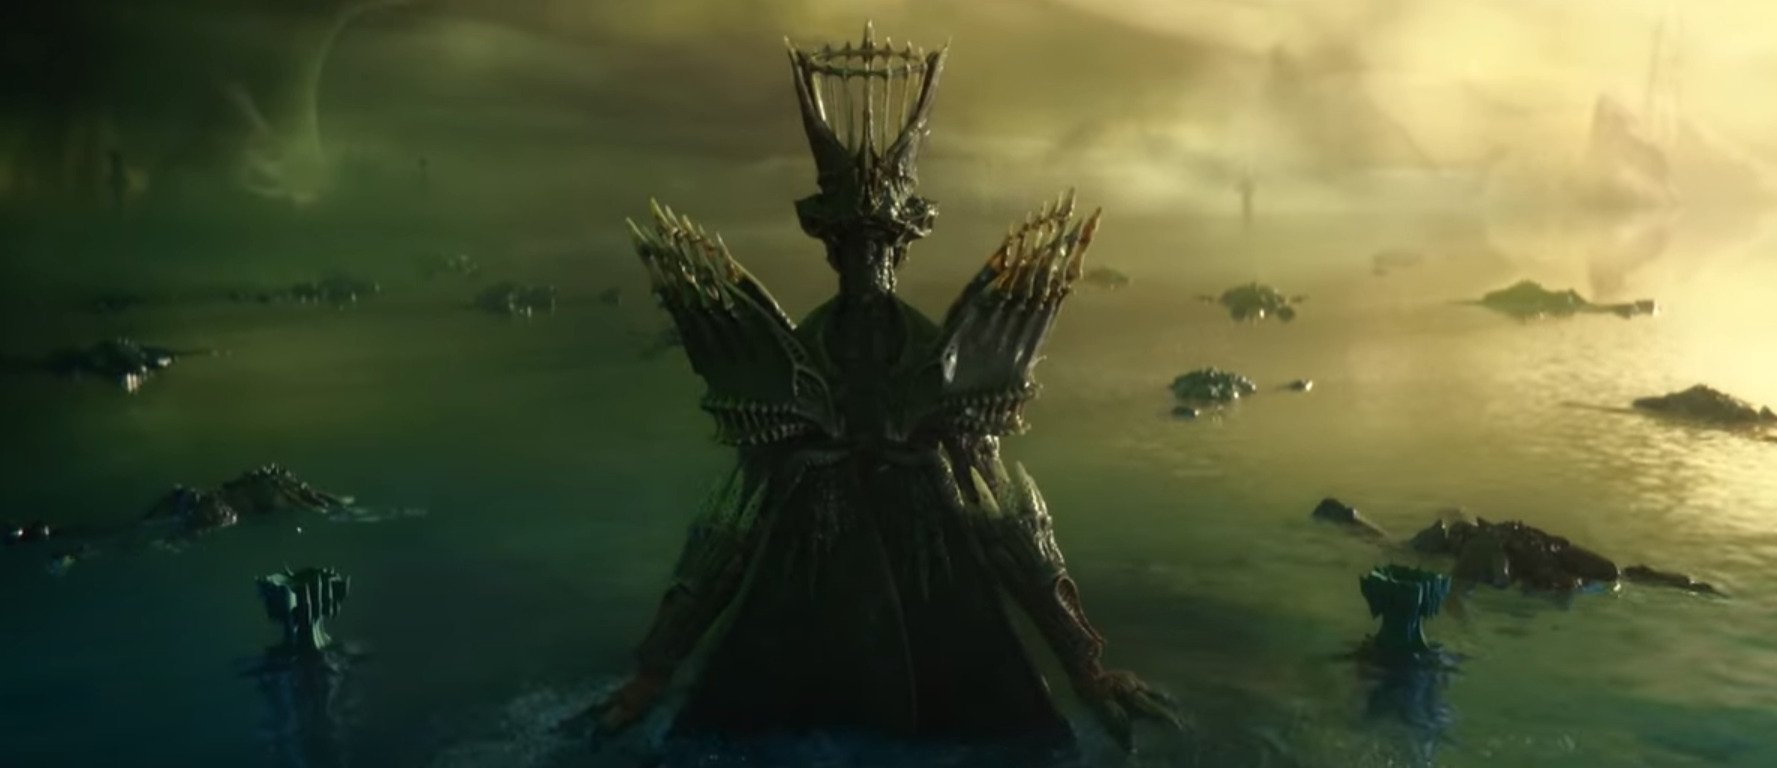 Destiny 2 Witch Queen Revealed As Savanthun Steps Into The Spotlight With Light Wielding Hive Guardians; Season Of The Lost Detailed